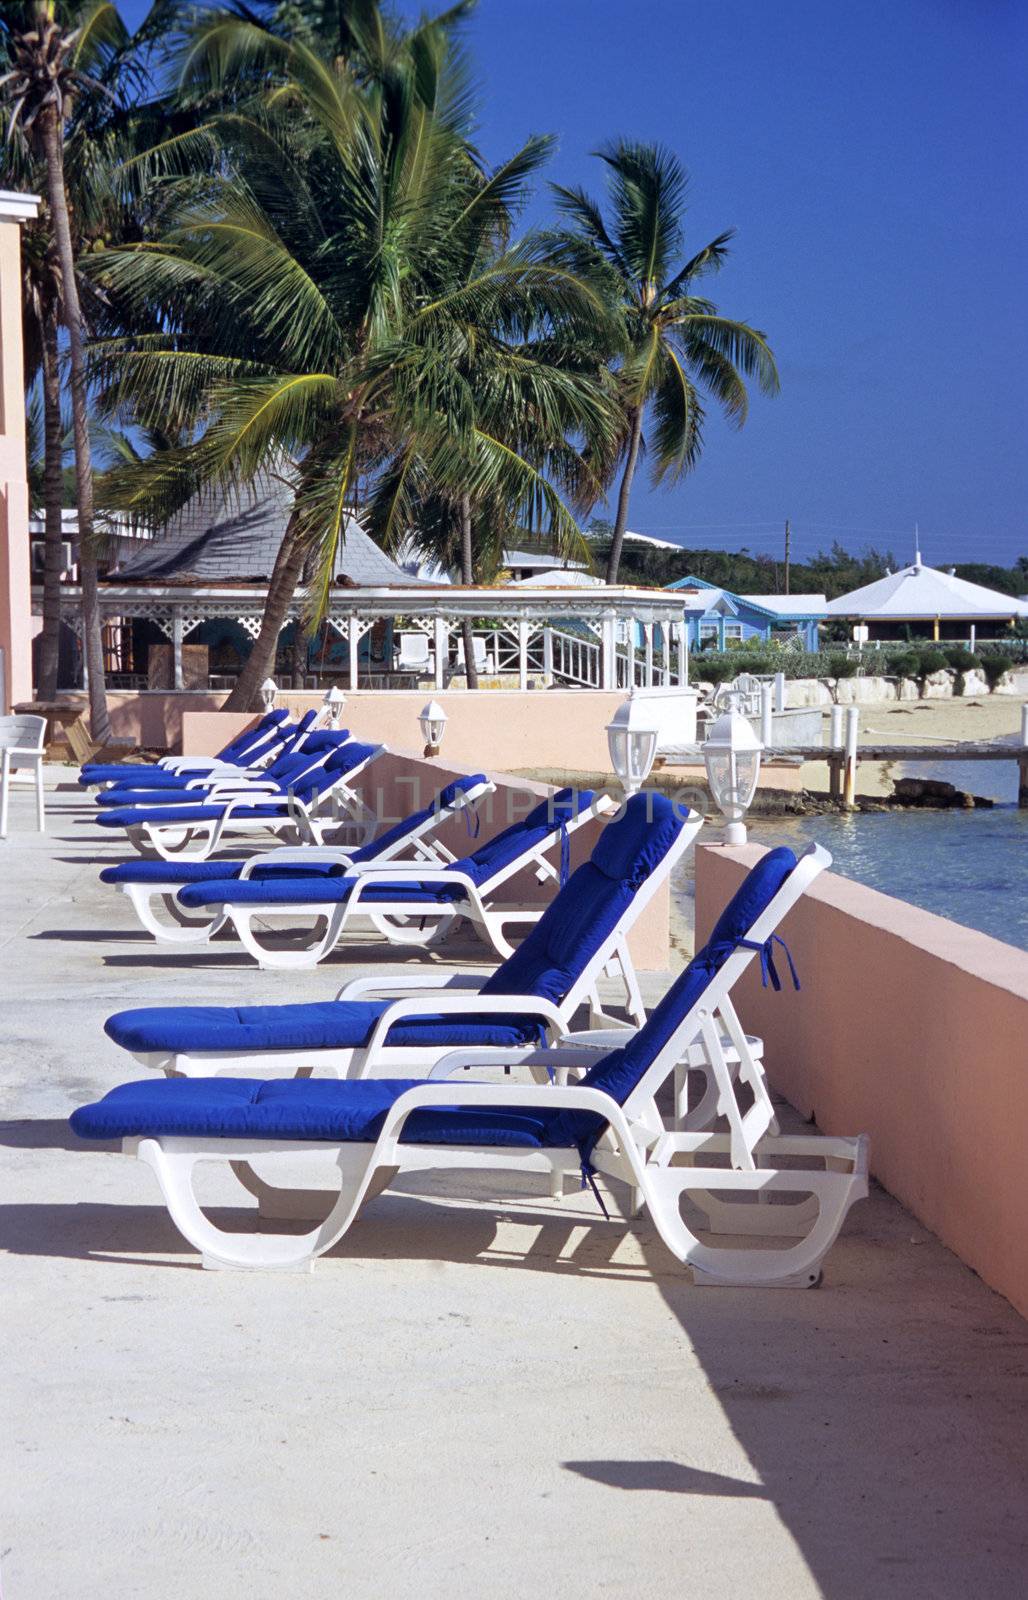 Empty deck chairs await vacationers in Great Exuma, the Bahamas.